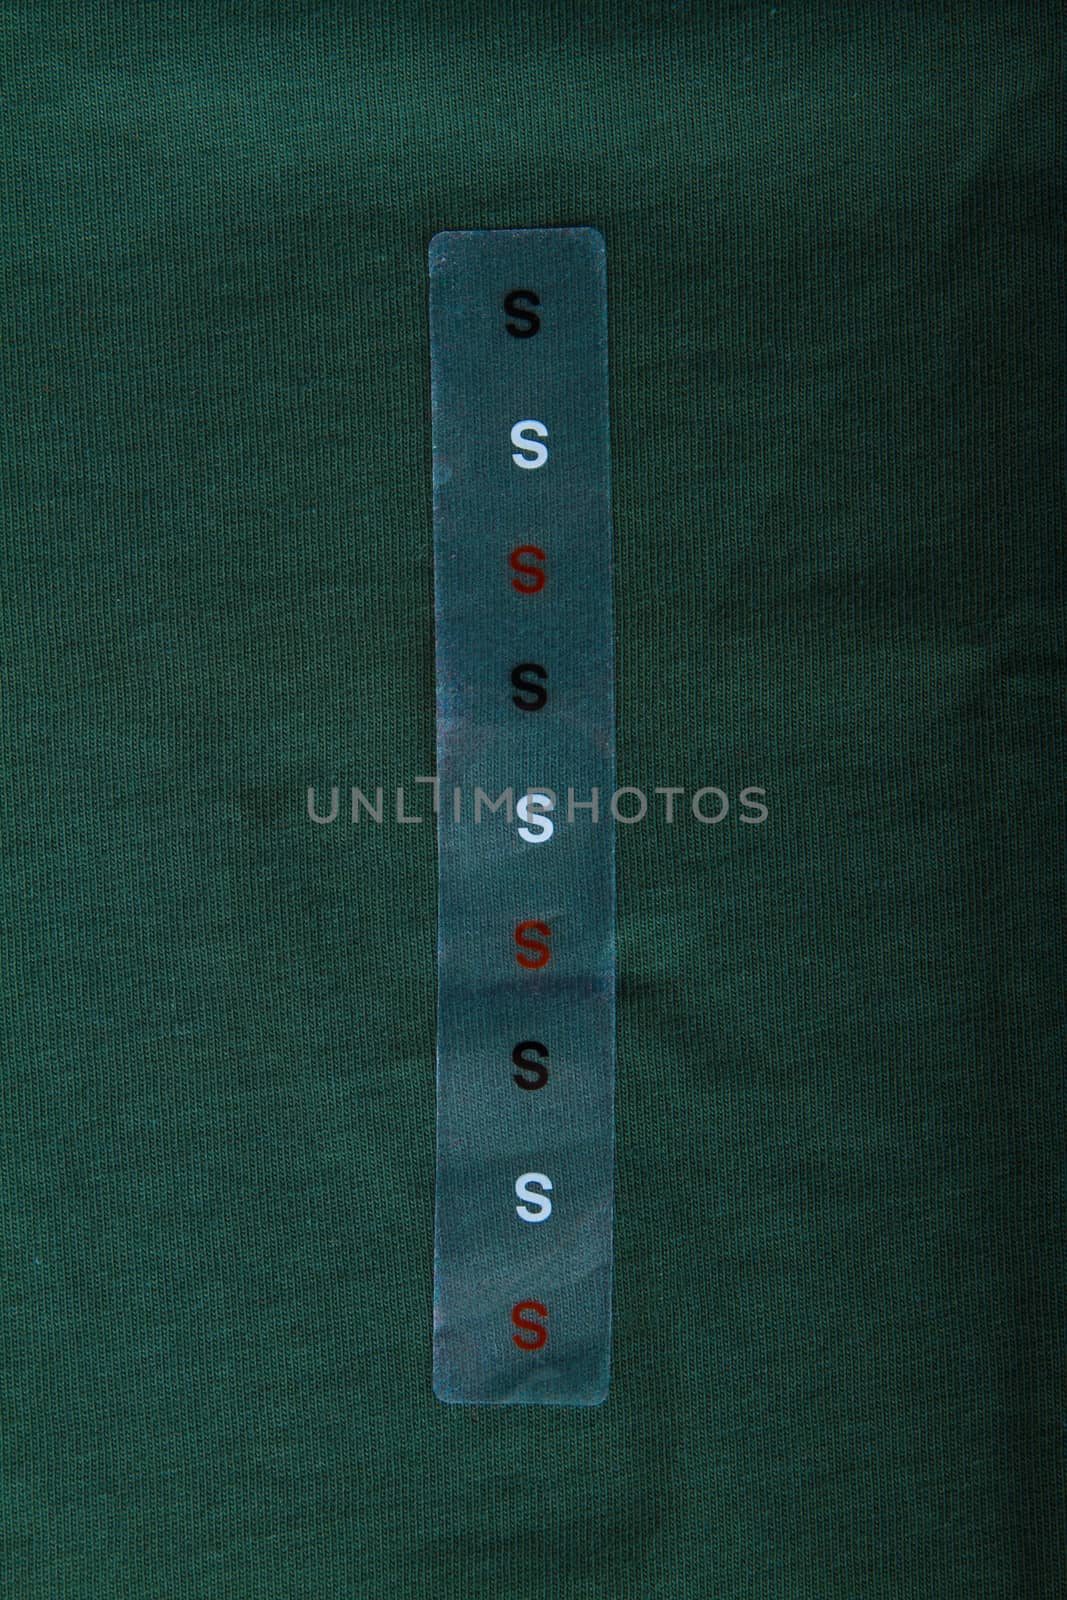 Label size S on green cloth - Stock Image